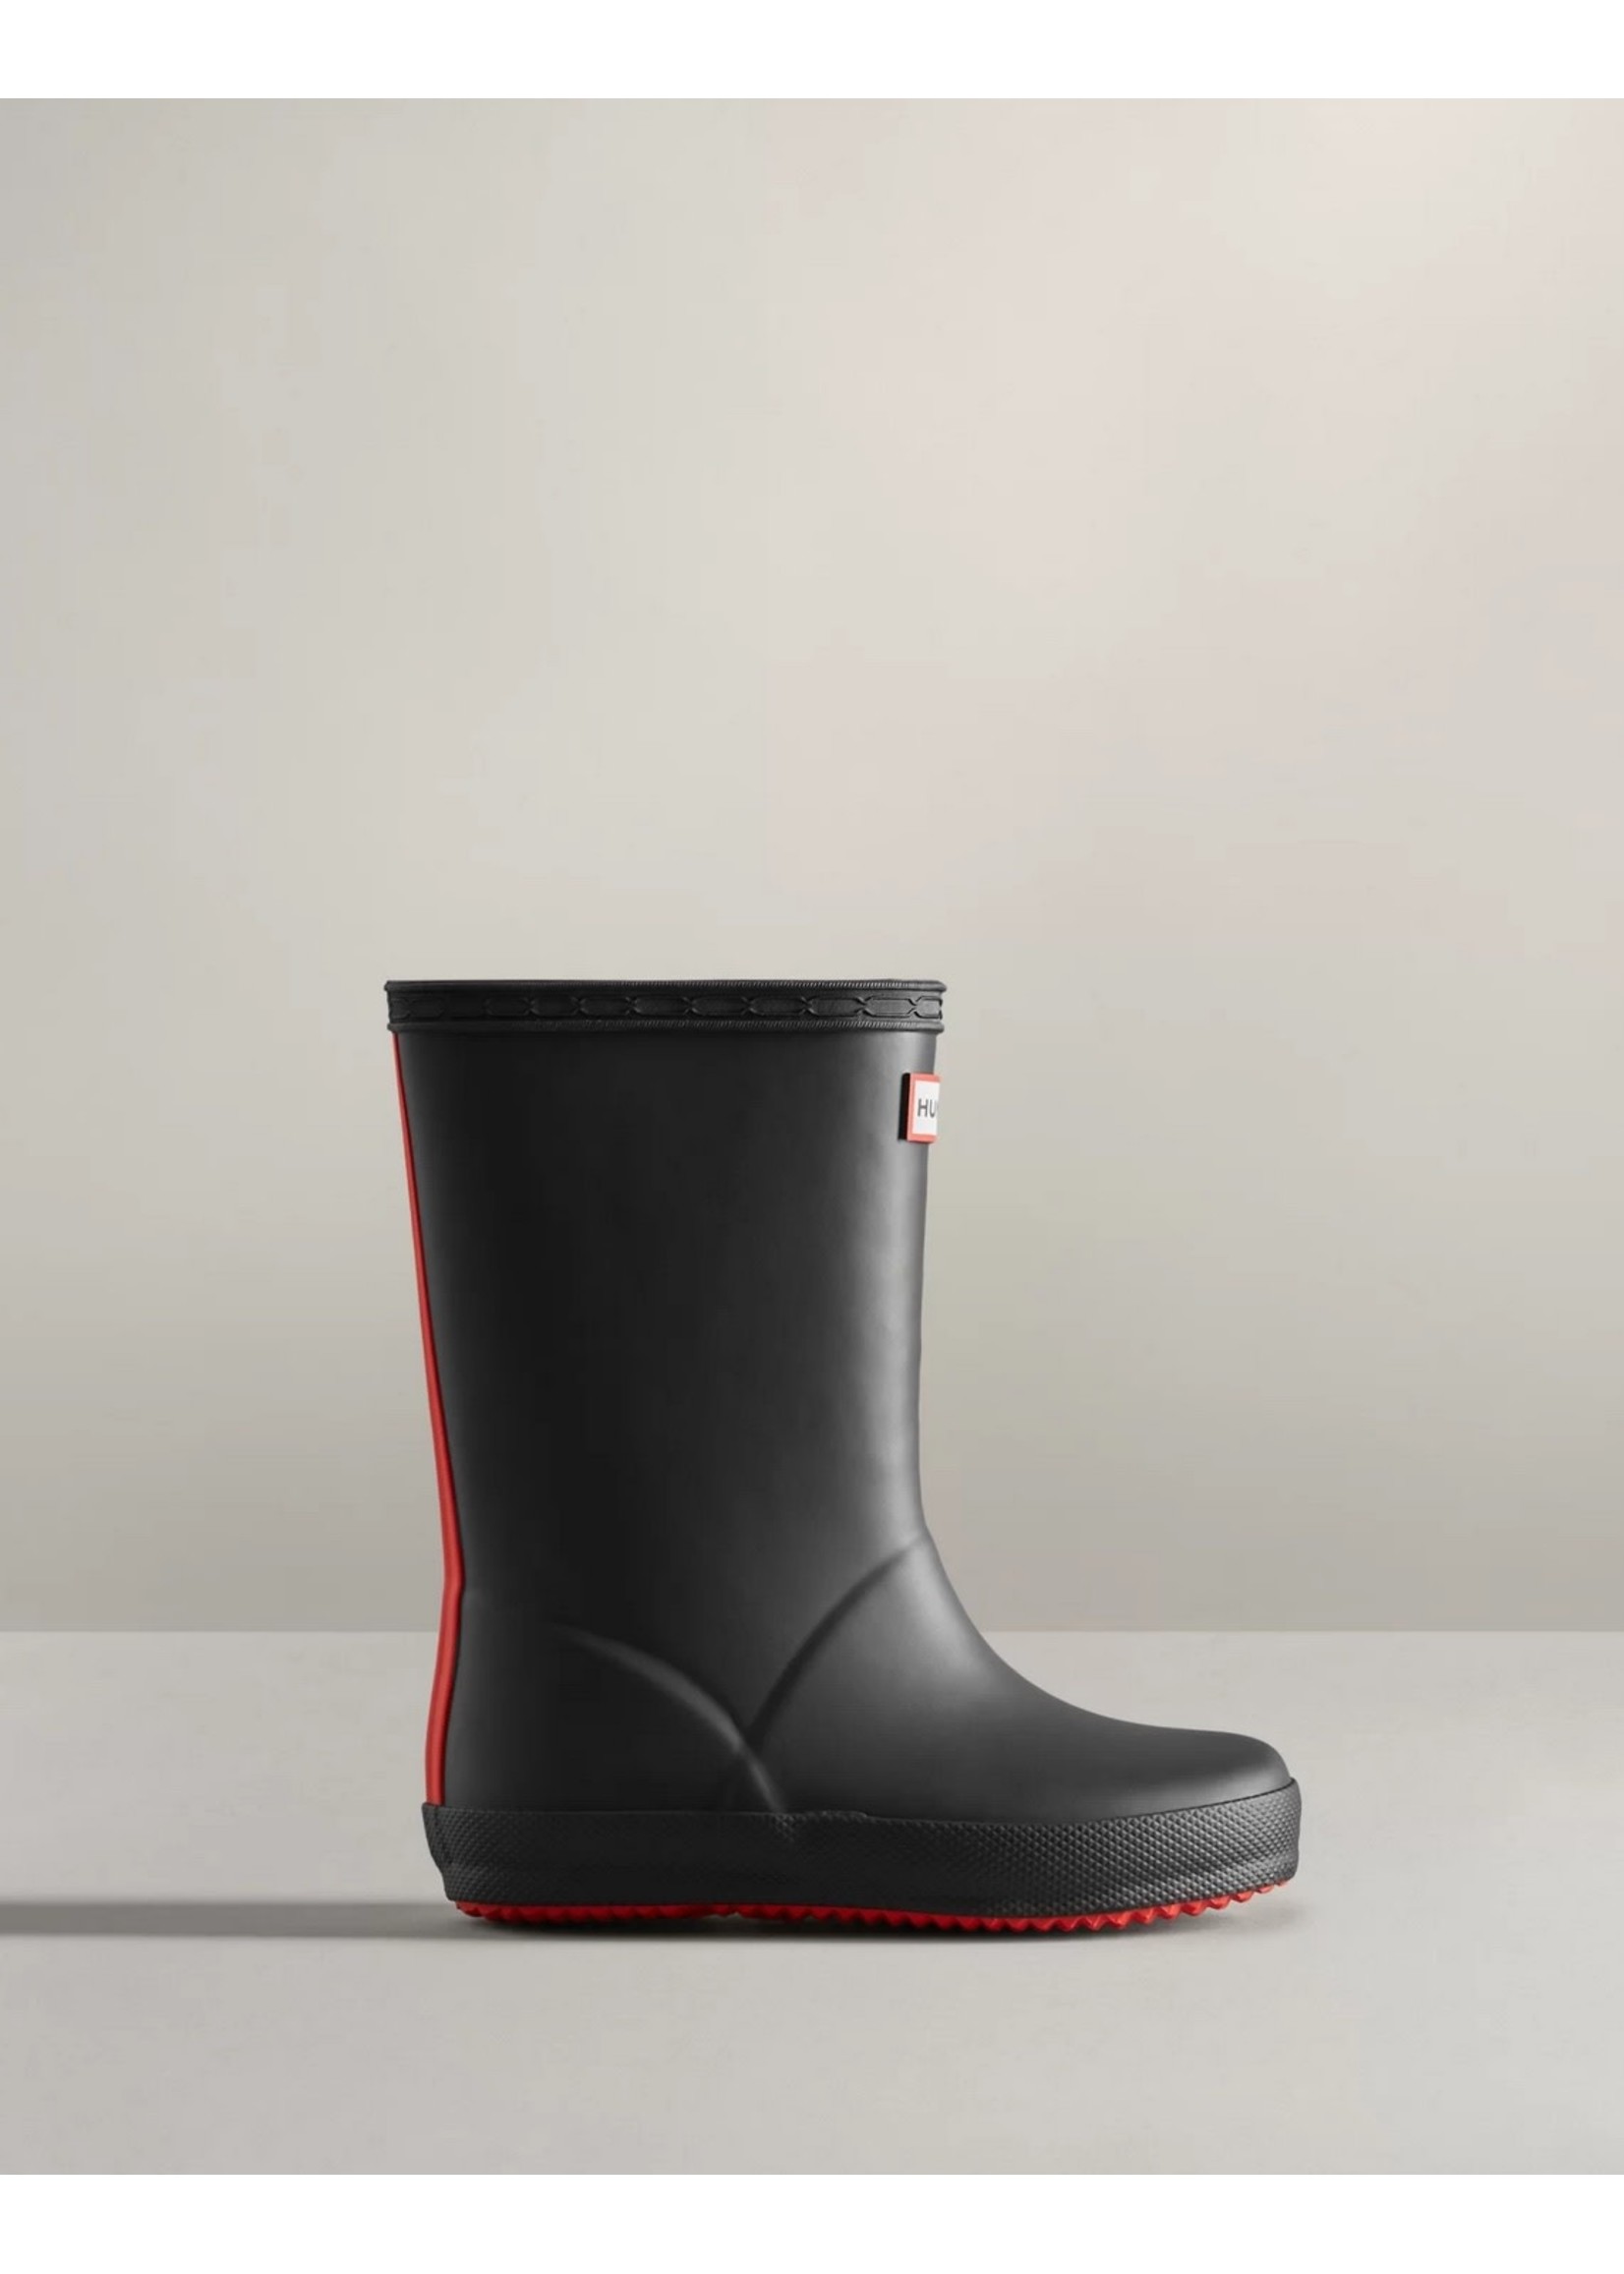 Hunter Boots Hunter Boots, Kids First Classic Insulated Rain Boots: Black/logo red